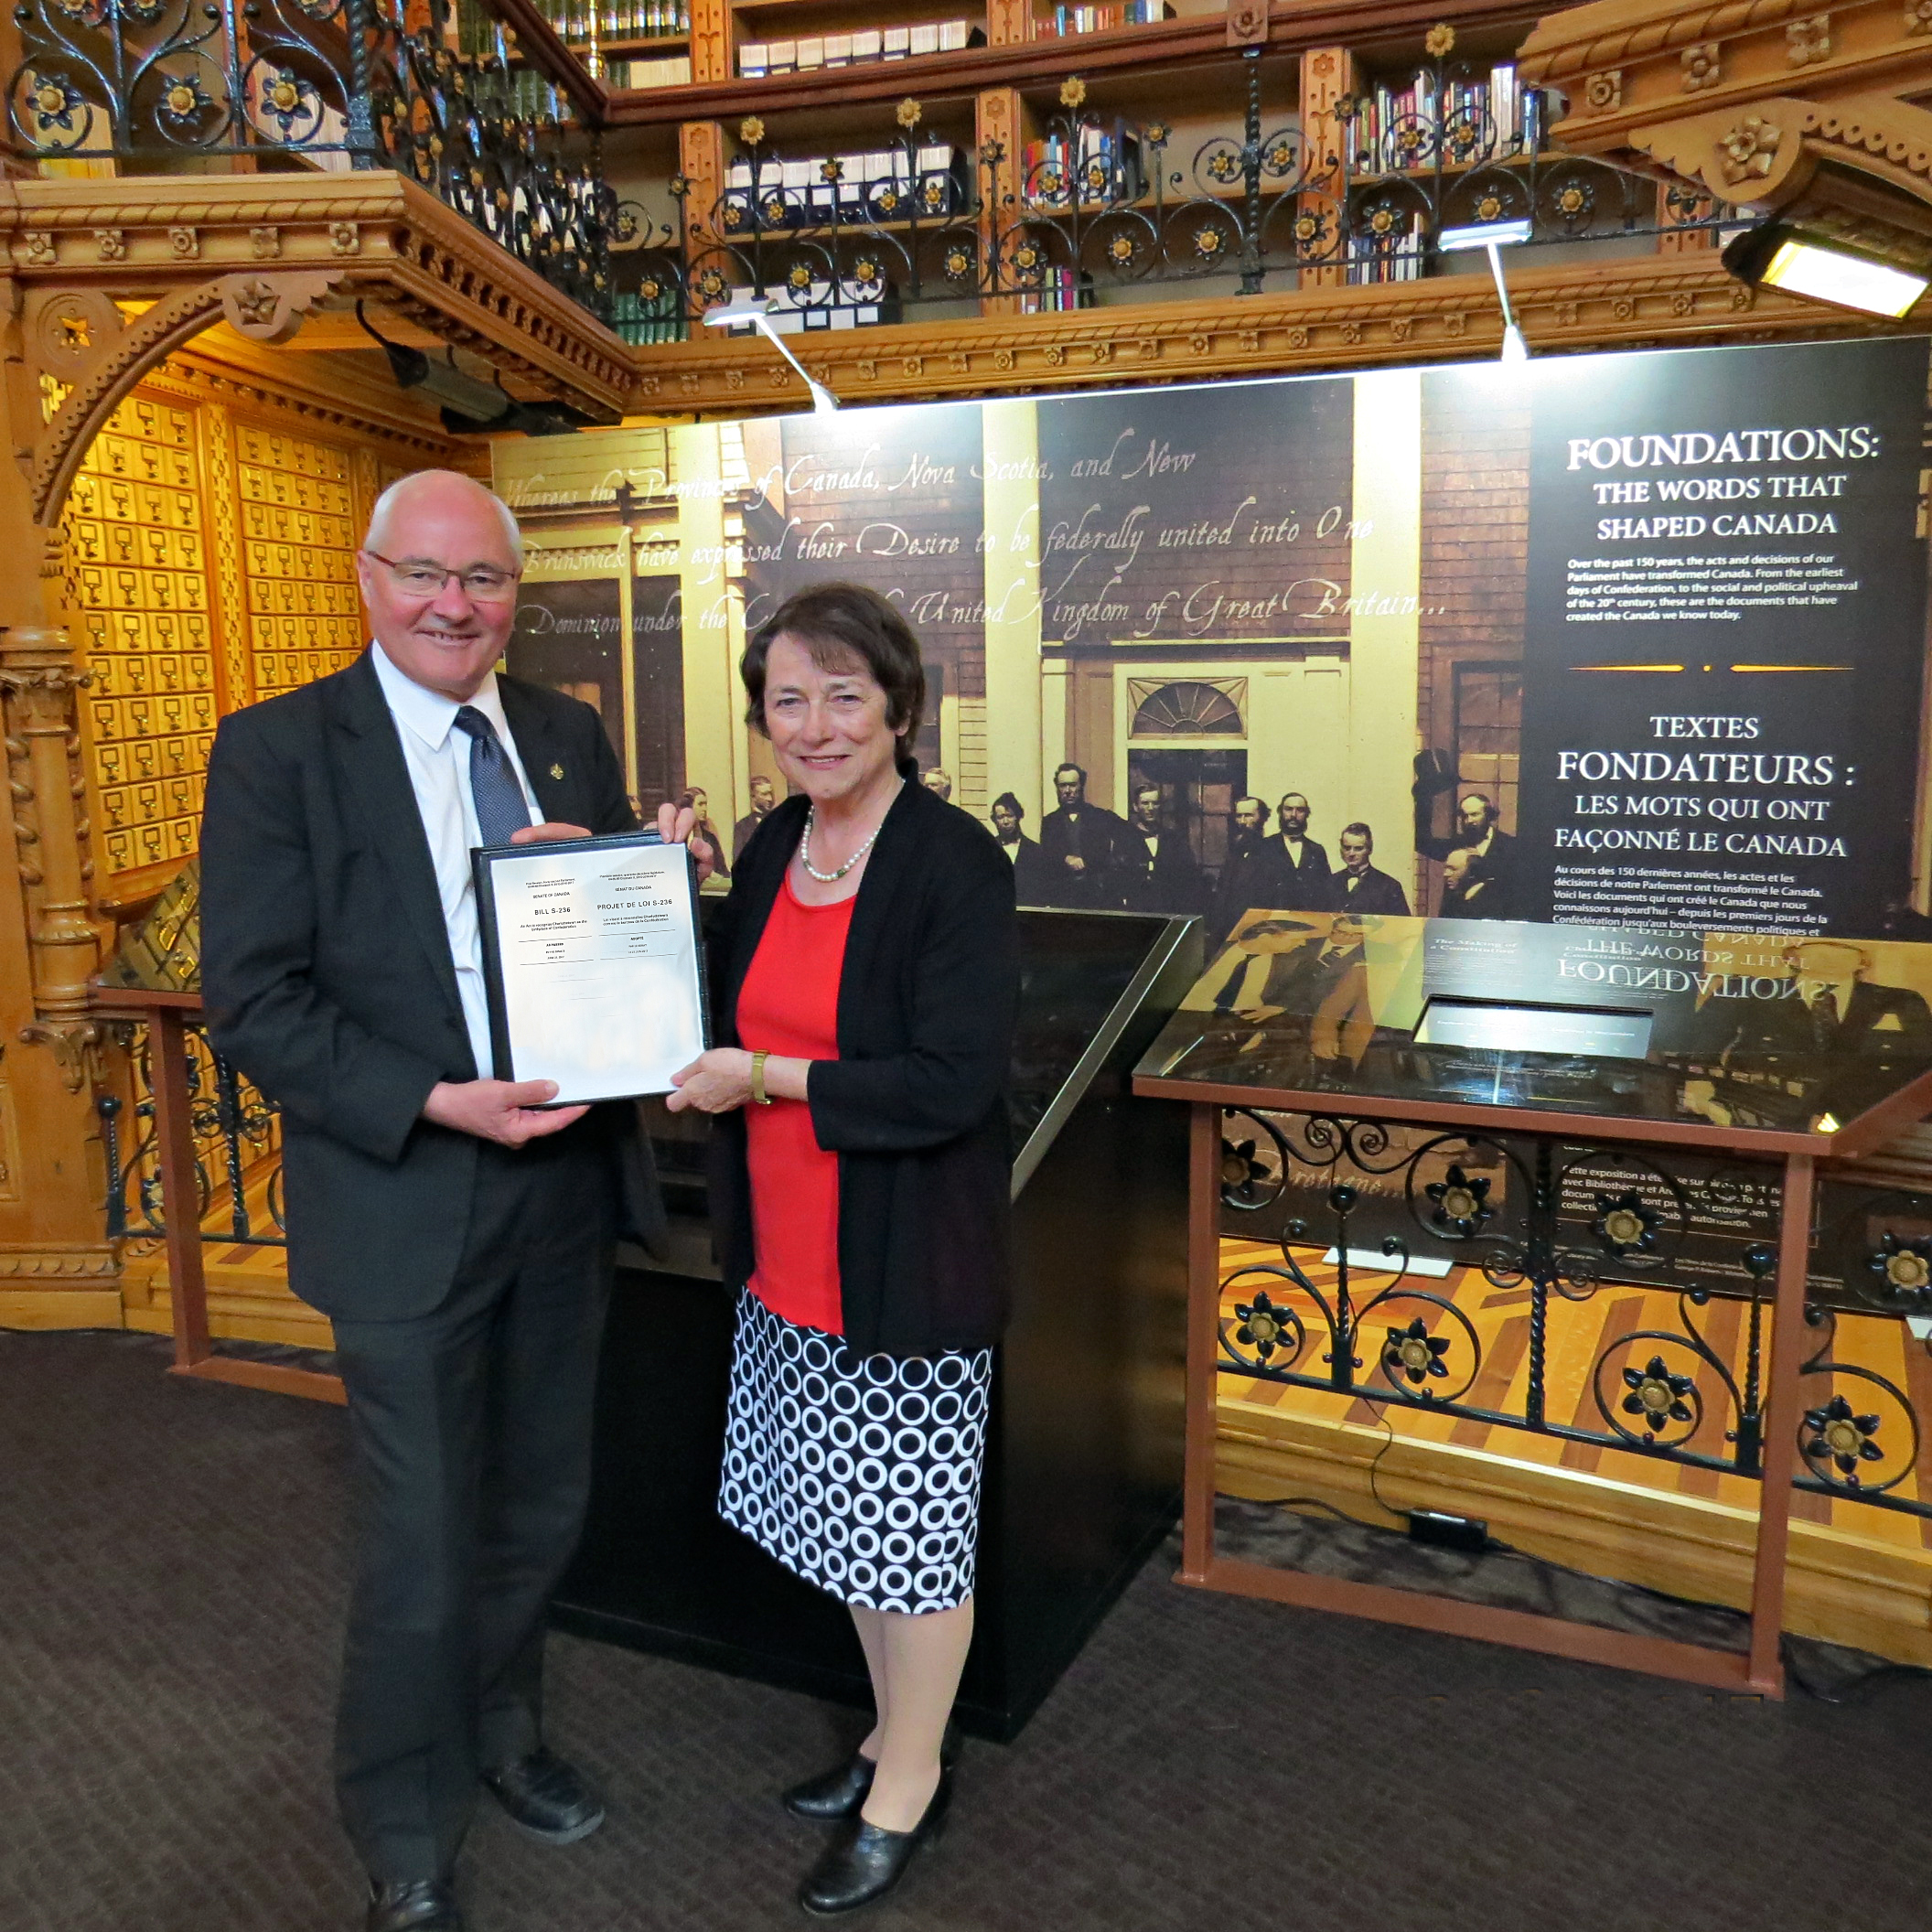 Senator Diane Griffin hands off Bill S-236, the <em>Recognition of Charlottetown as the Birthplace of Confederation Act</em>, to House of Commons sponsor MP Wayne Easter in the Library of Parliament, Ottawa.